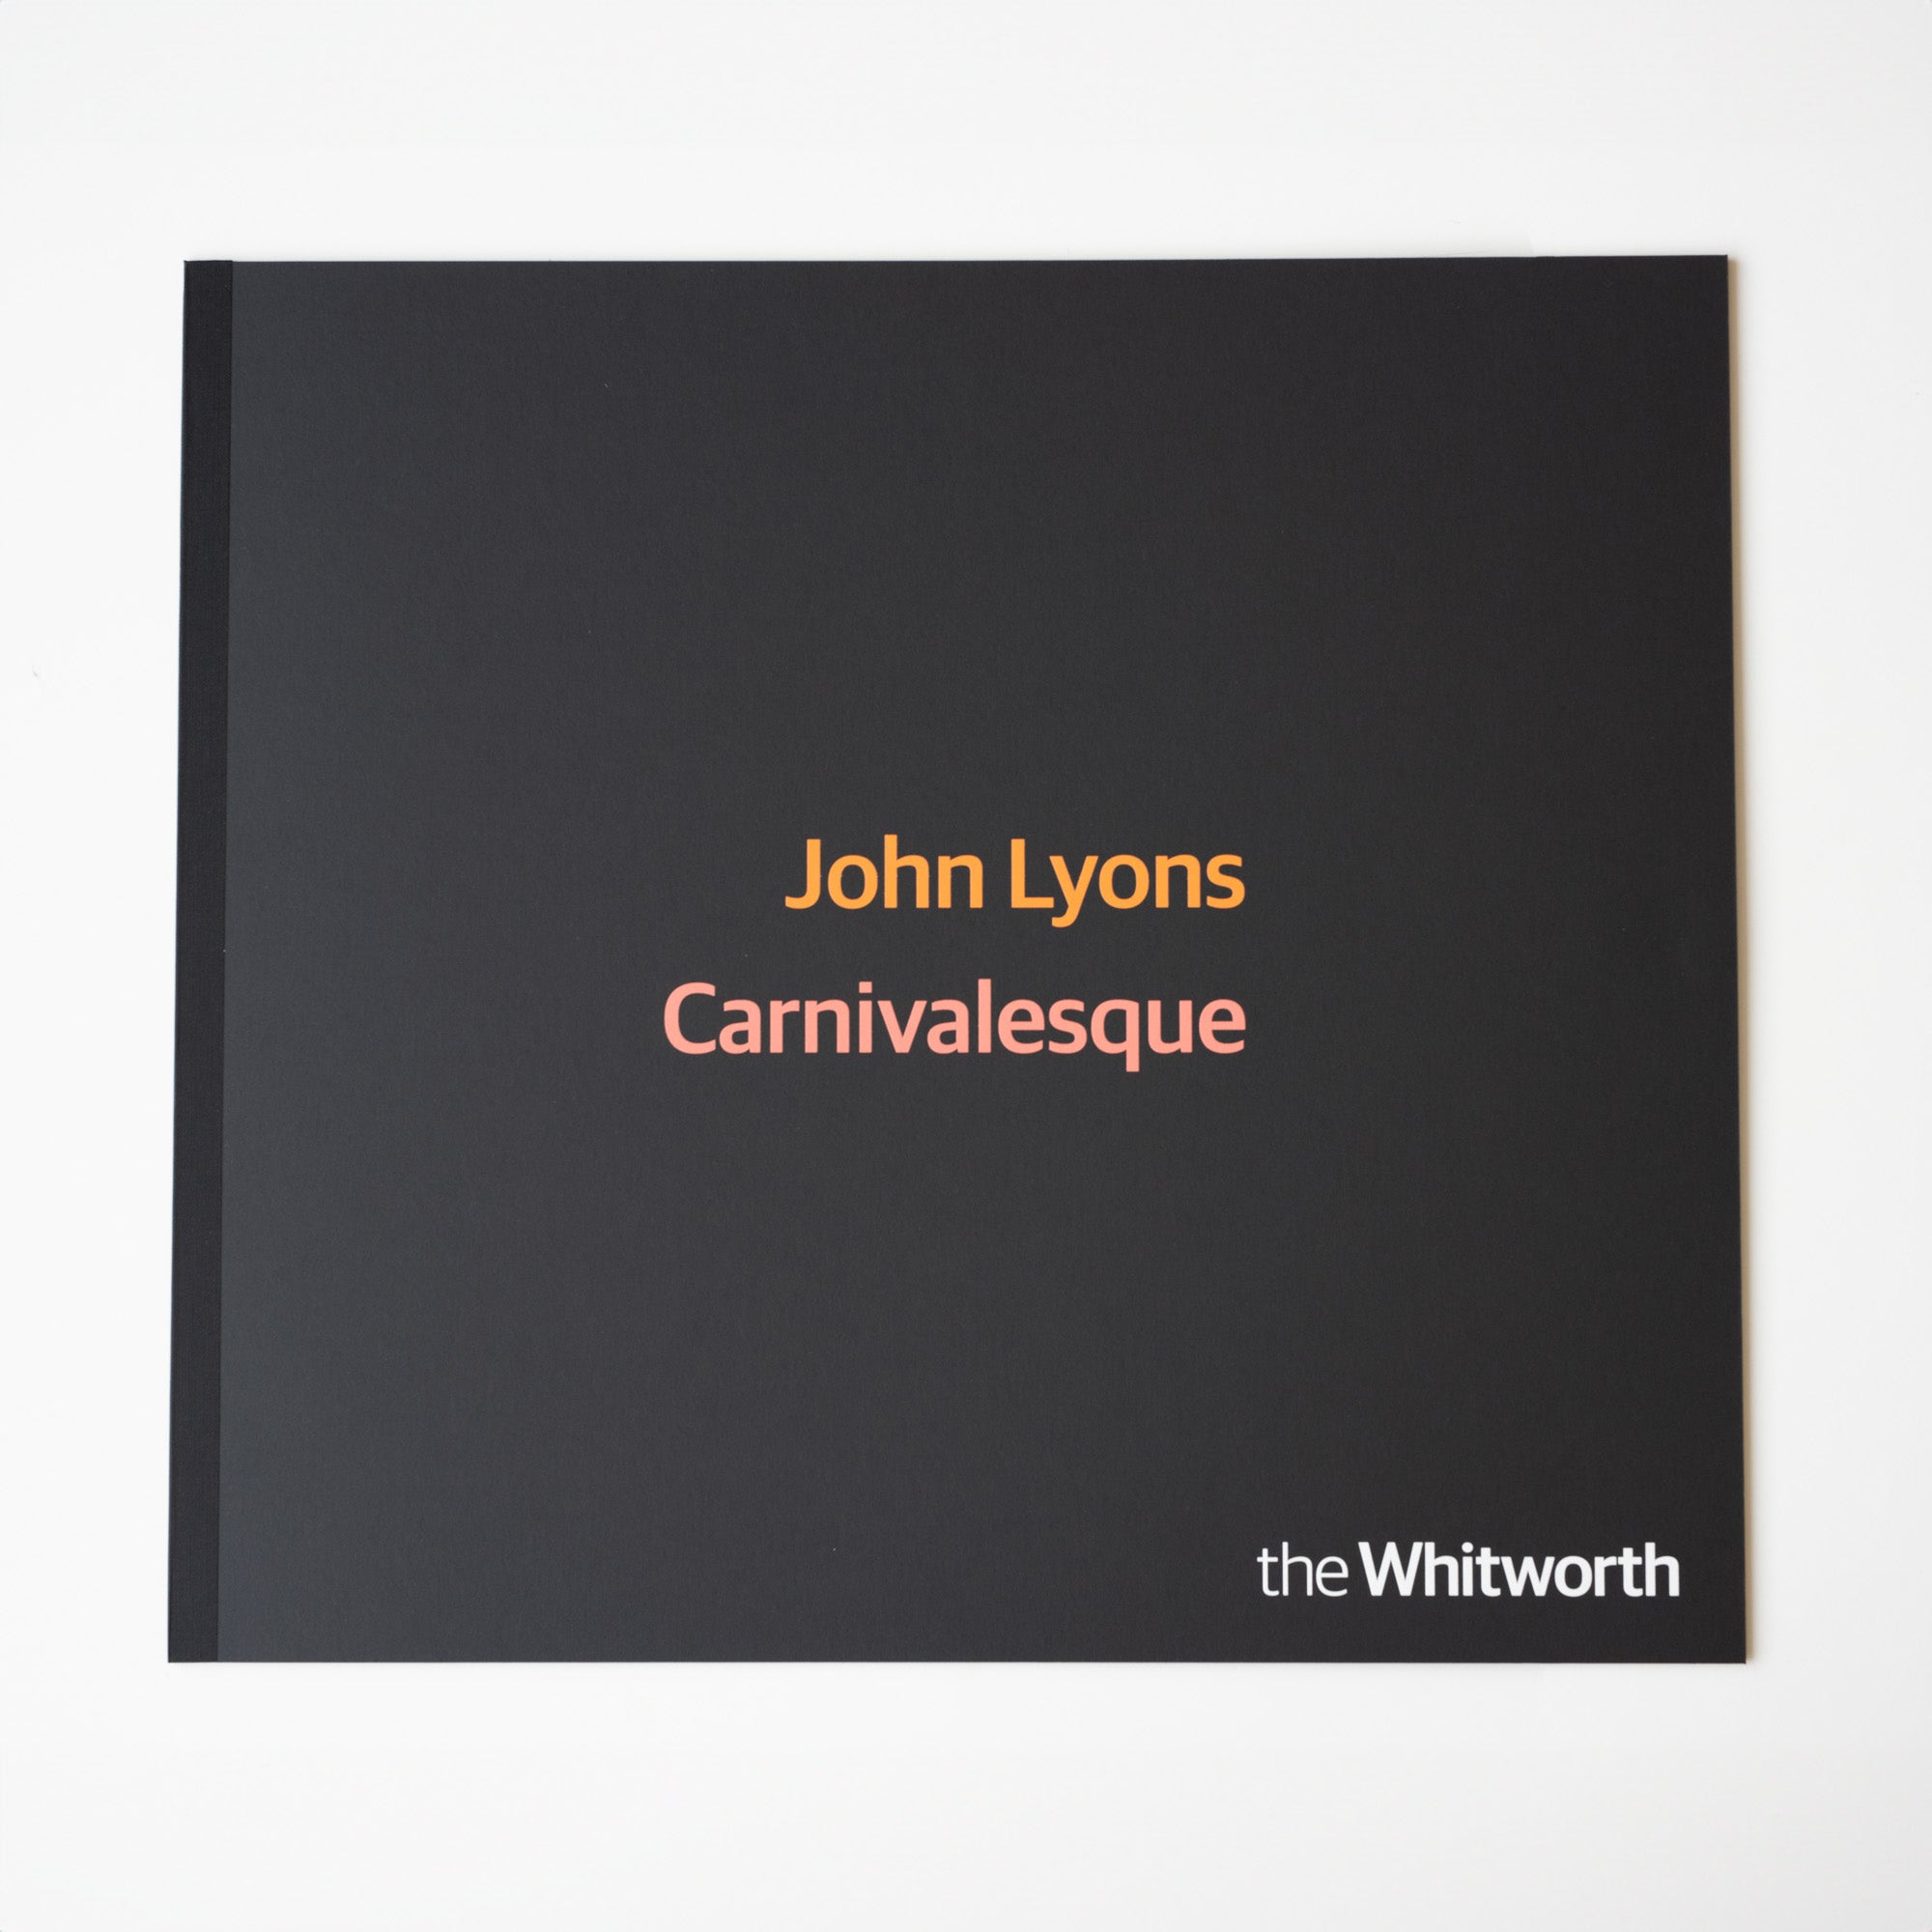 Front cover of black portfolio box with John Lyons carnivalesque title in orange and pink writing.